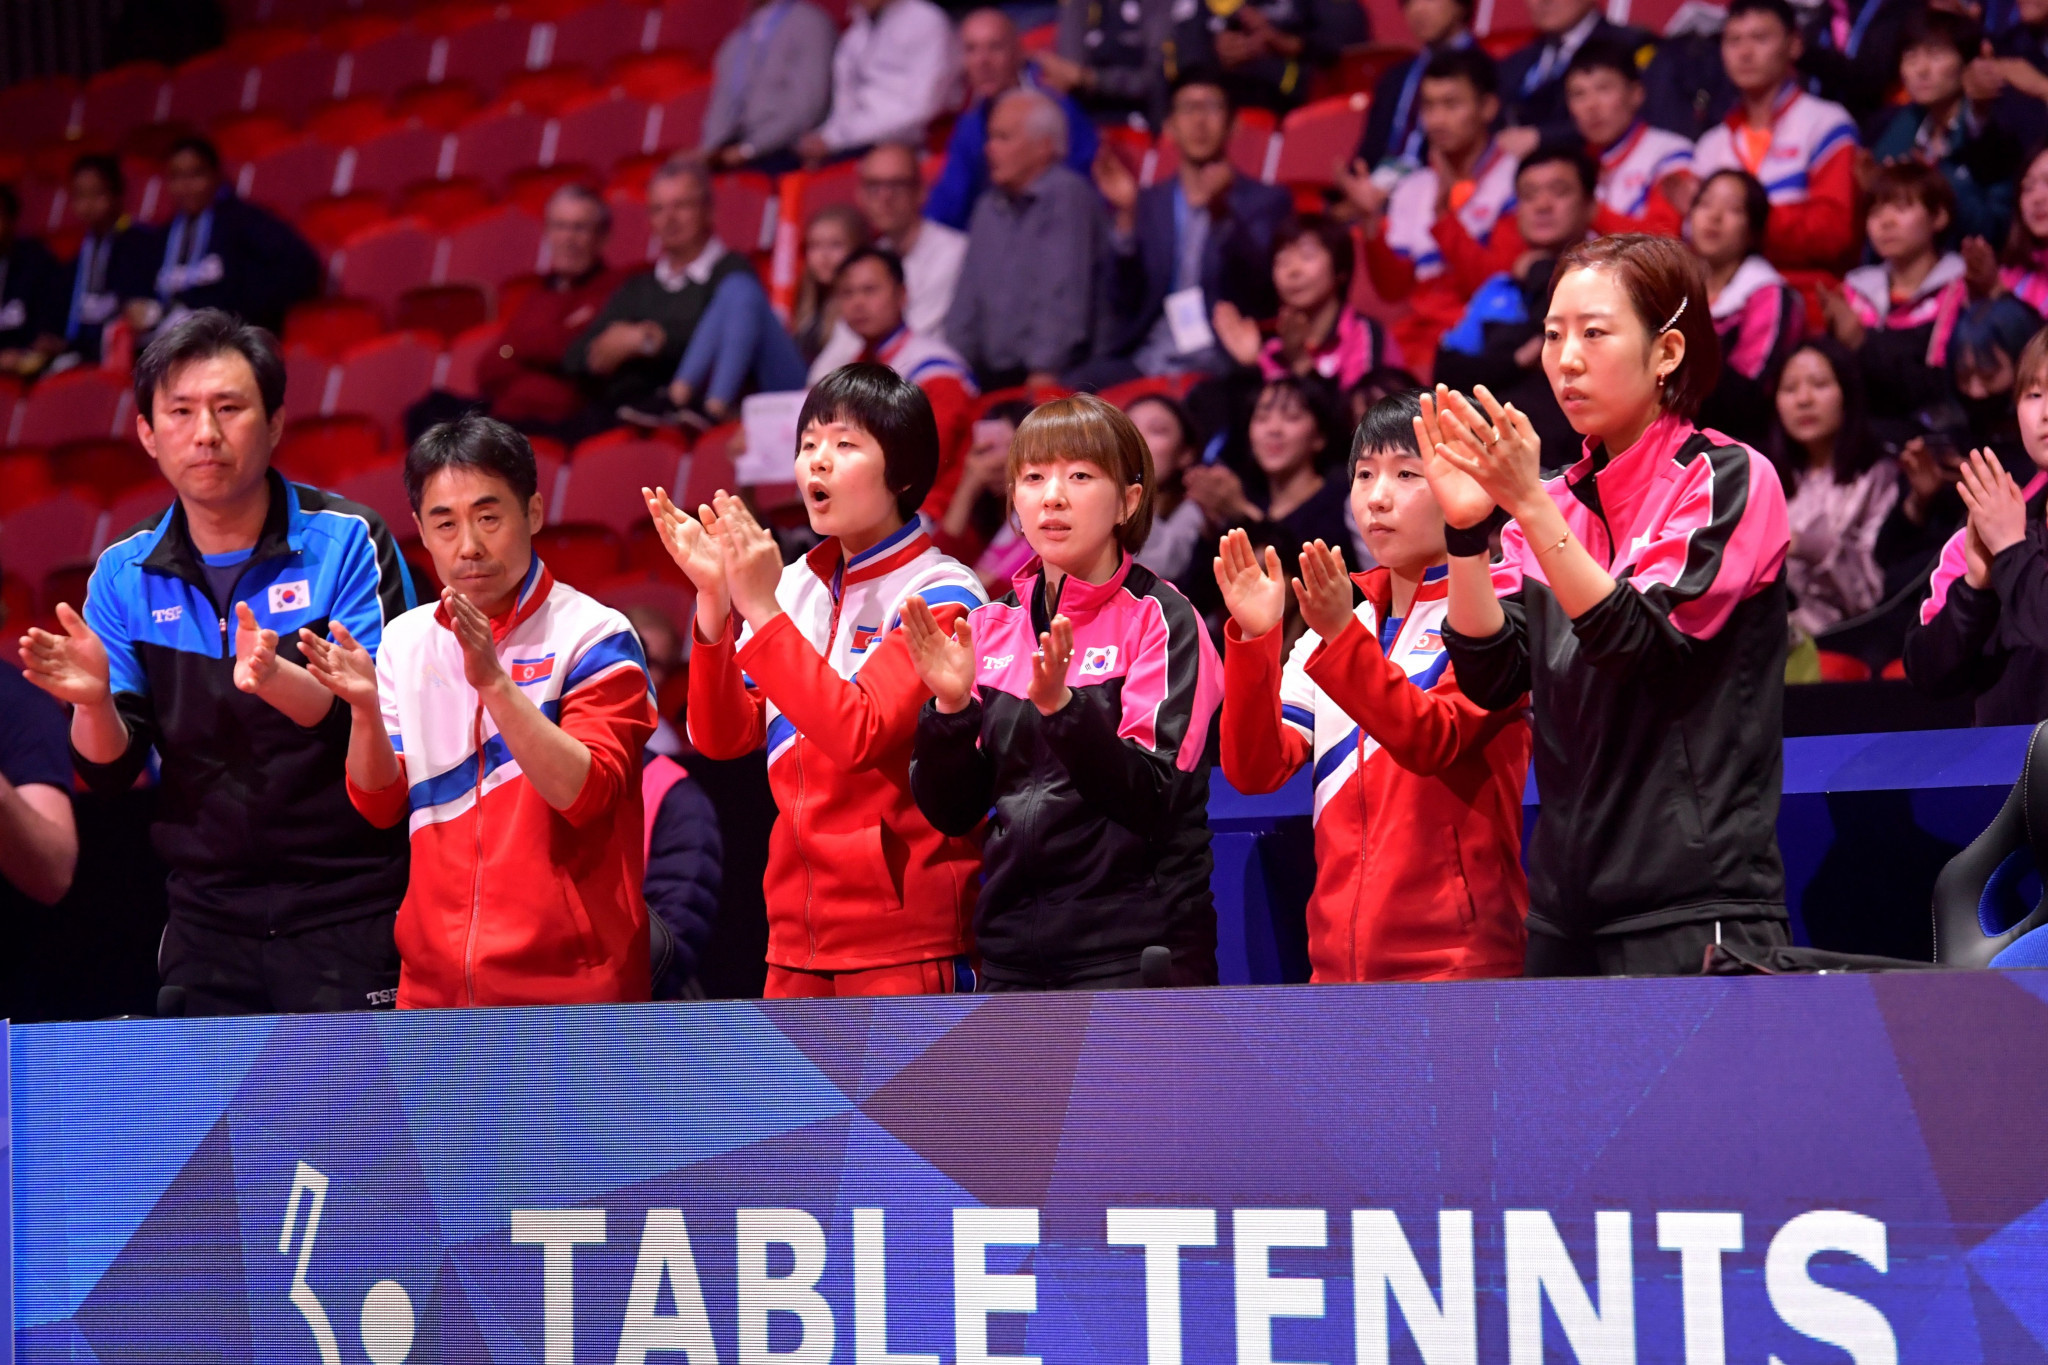 South Korean players miss entry deadline for table tennis event in North Korea